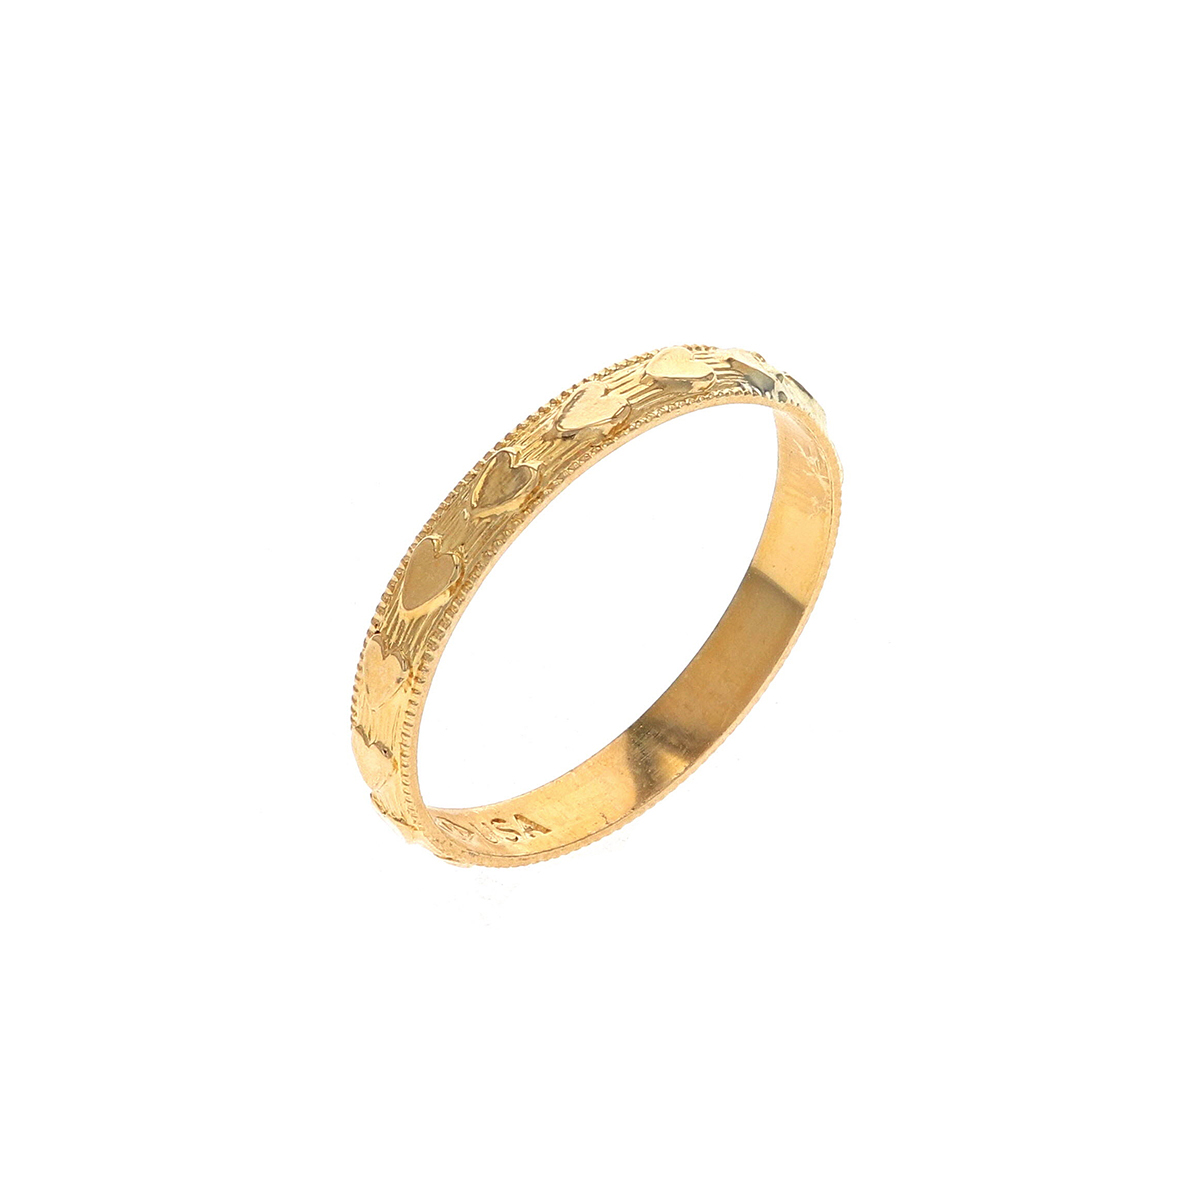 Children's 10K Yellow Gold Ring with Hearts